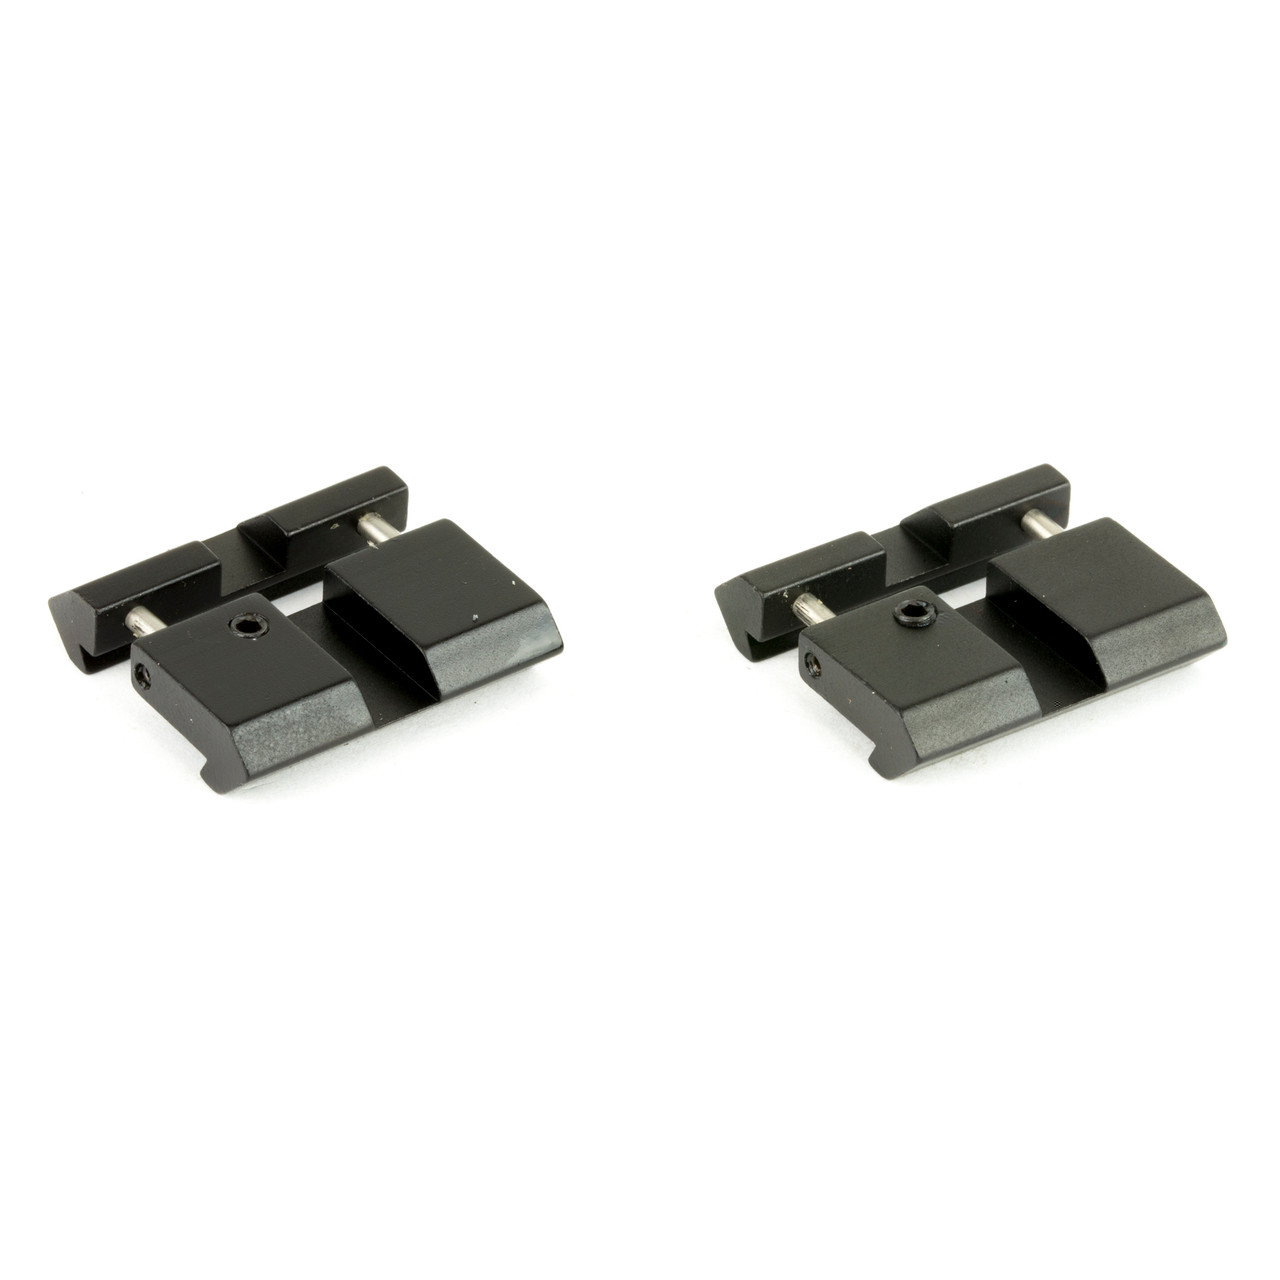 Utg Low Pro Snap-in Rail Adapter